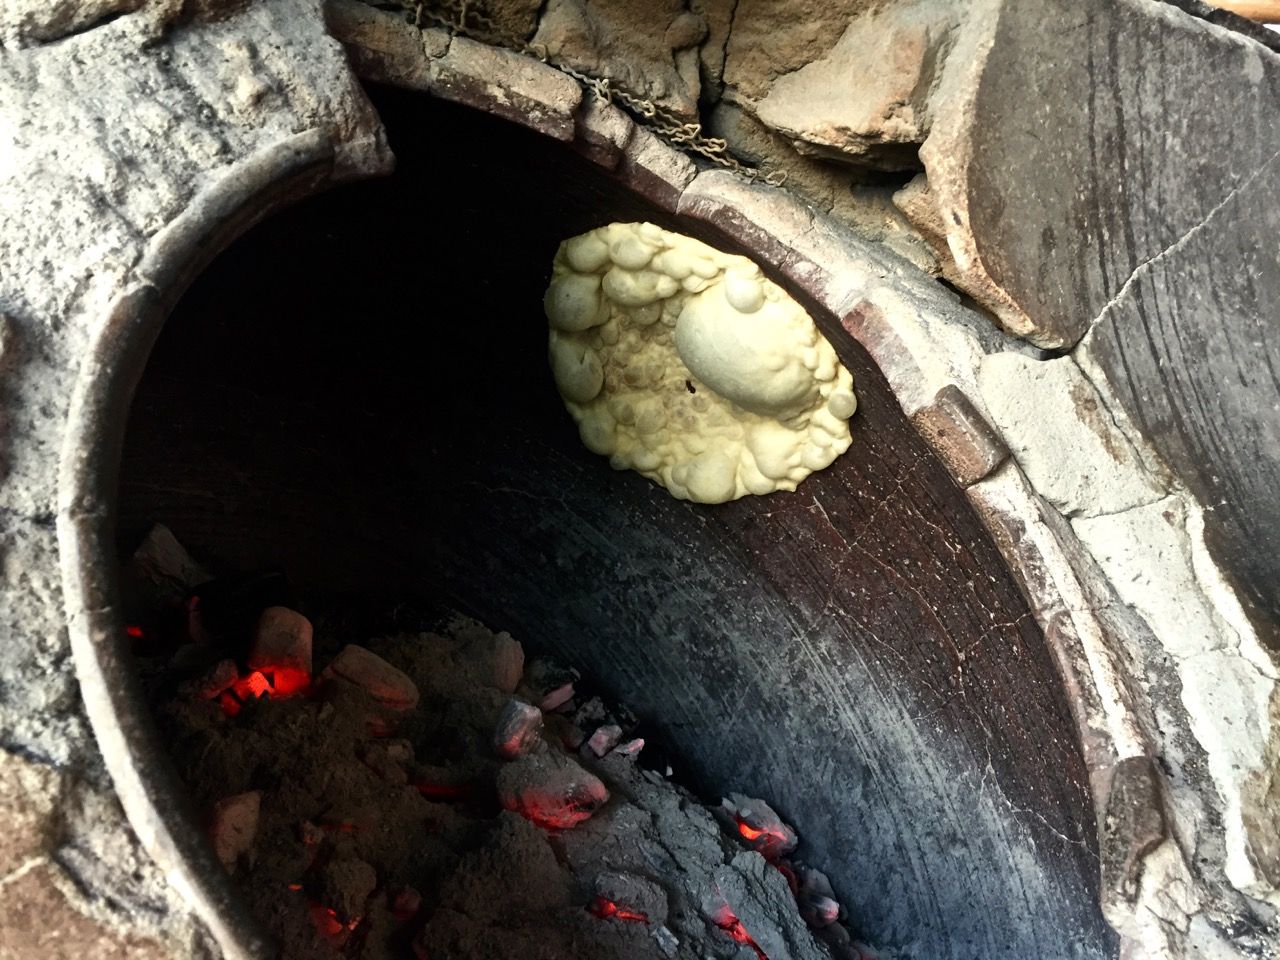 Naan being baked inside an oven.